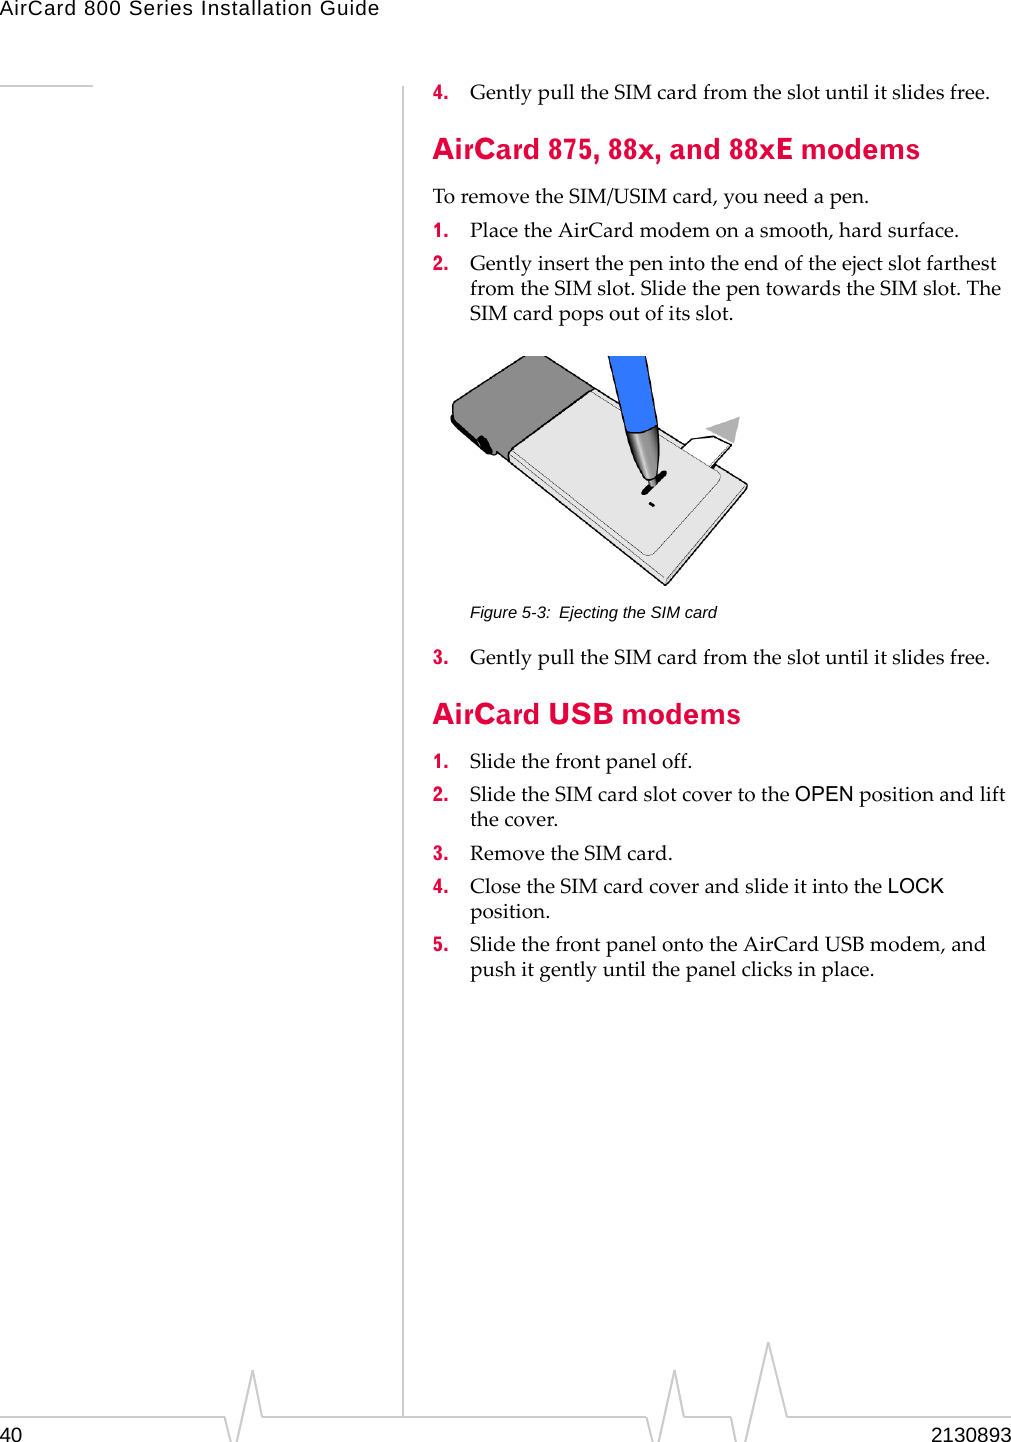 AirCard 800 Series Installation Guide 4.  Gently pull the SIM card from the slot until it slides free. AirCard 875, 88x, and 88xE modems To remove the SIM/USIM card, you need a pen. 1.  Place the AirCard modem on a smooth, hard surface. 2.  Gently insert the pen into the end of the eject slot farthest from the SIM slot. Slide the pen towards the SIM slot. The SIM card pops out of its slot. Figure 5-3:  Ejecting the SIM card 3.  Gently pull the SIM card from the slot until it slides free. AirCard USB modems 1.  Slide the front panel off. 2.  Slide the SIM card slot cover to the OPEN position and lift the cover. 3.  Remove the SIM card. 4.  Close the SIM card cover and slide it into the LOCK position. 5.  Slide the front panel onto the AirCard USB modem, and push it gently until the panel clicks in place. 40  2130893 